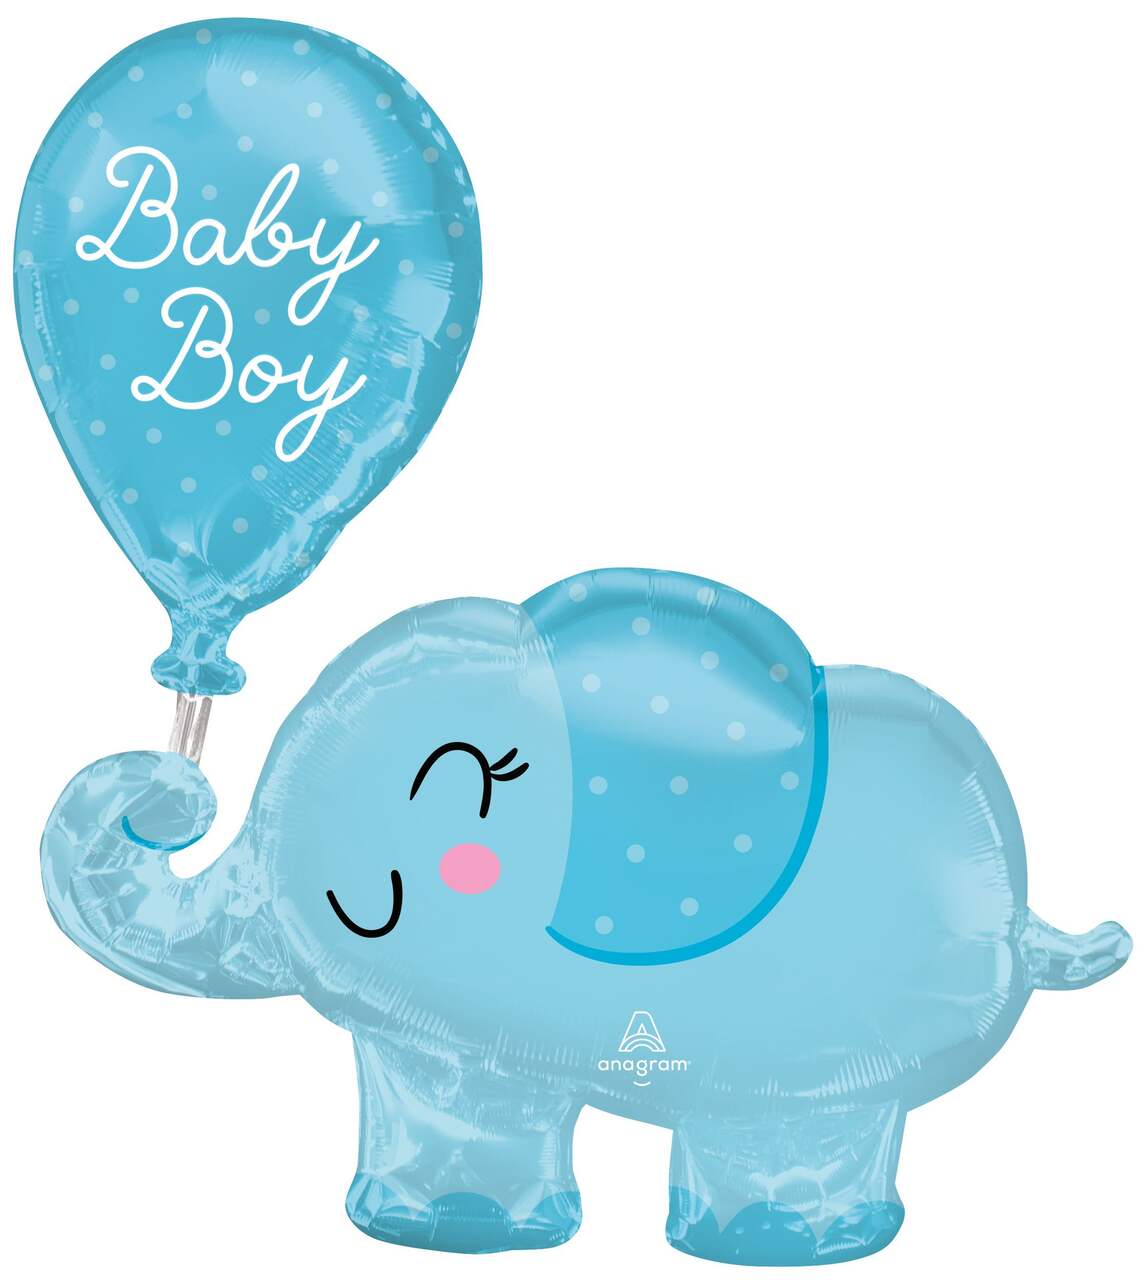 https://media-www.canadiantire.ca/product/seasonal-gardening/party-city-everyday/party-city-party-supplies-decor/8535500/baby-boy-elephant-deluxe-multi-balloon-642113da-e136-4ced-ba56-2297e23e3a16-jpgrendition.jpg?imdensity=1&imwidth=640&impolicy=mZoom